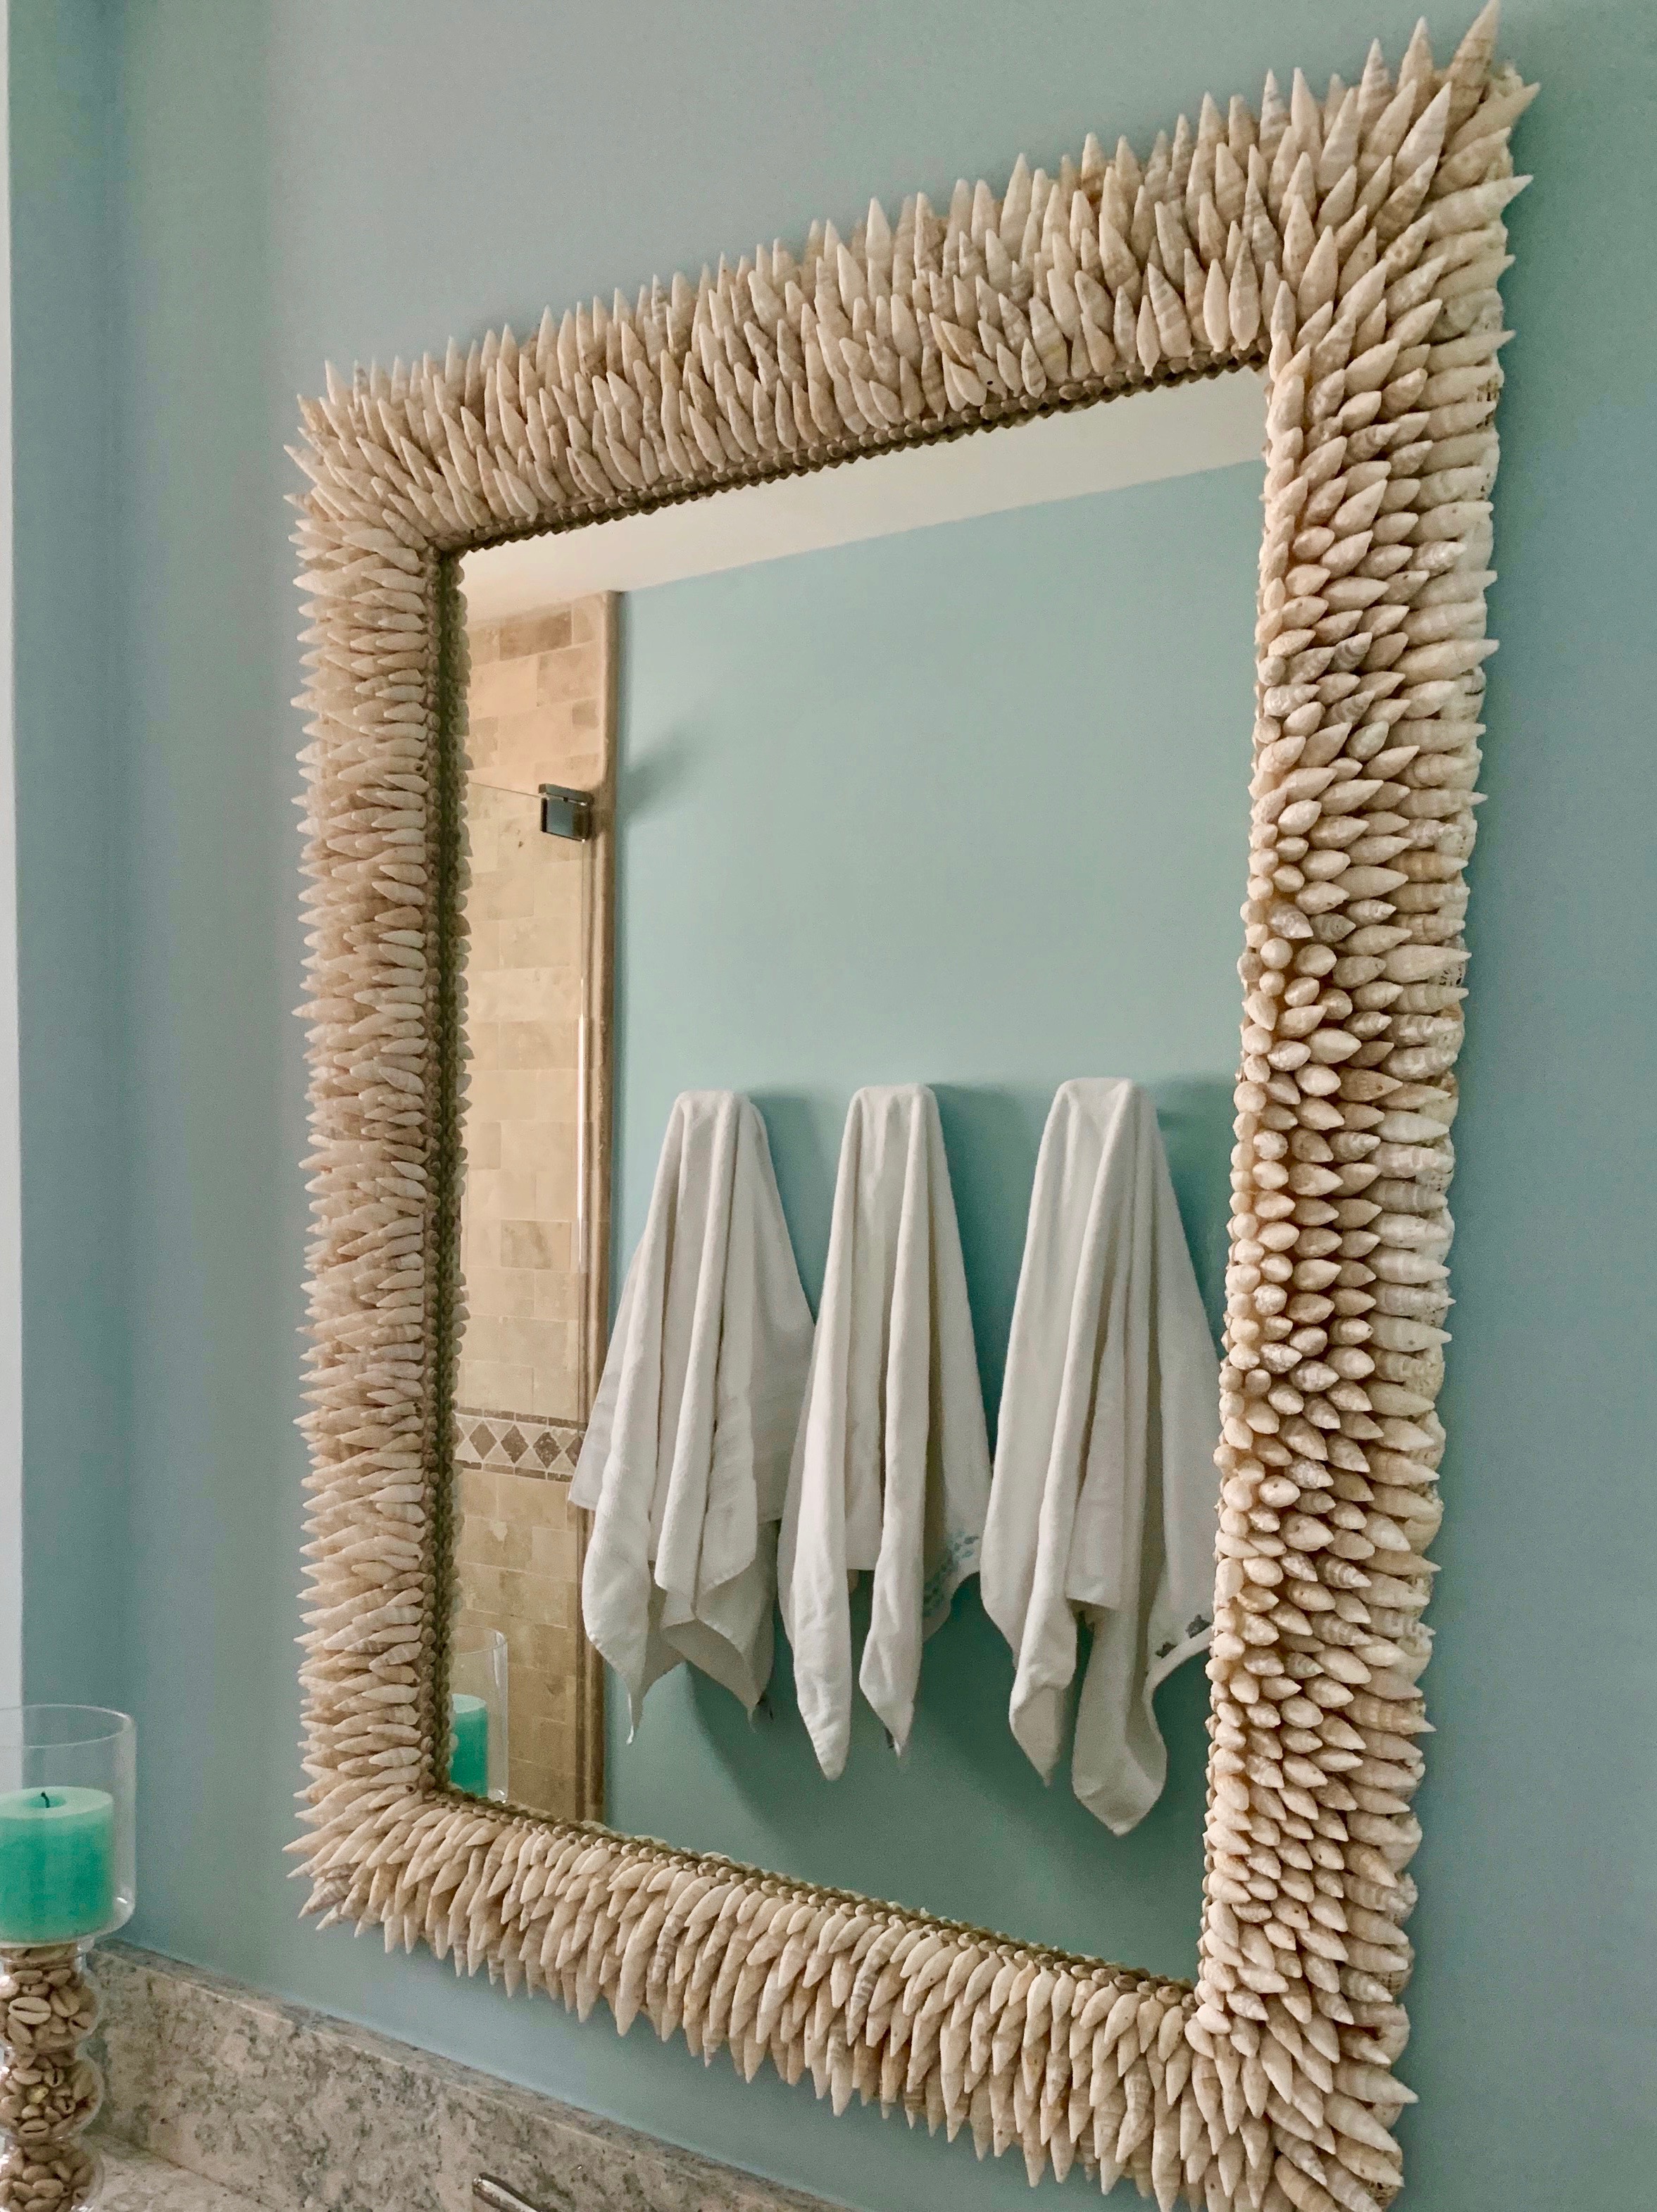 Three bath towels reflected in a mirror made with pointy seashells on a blue wall.